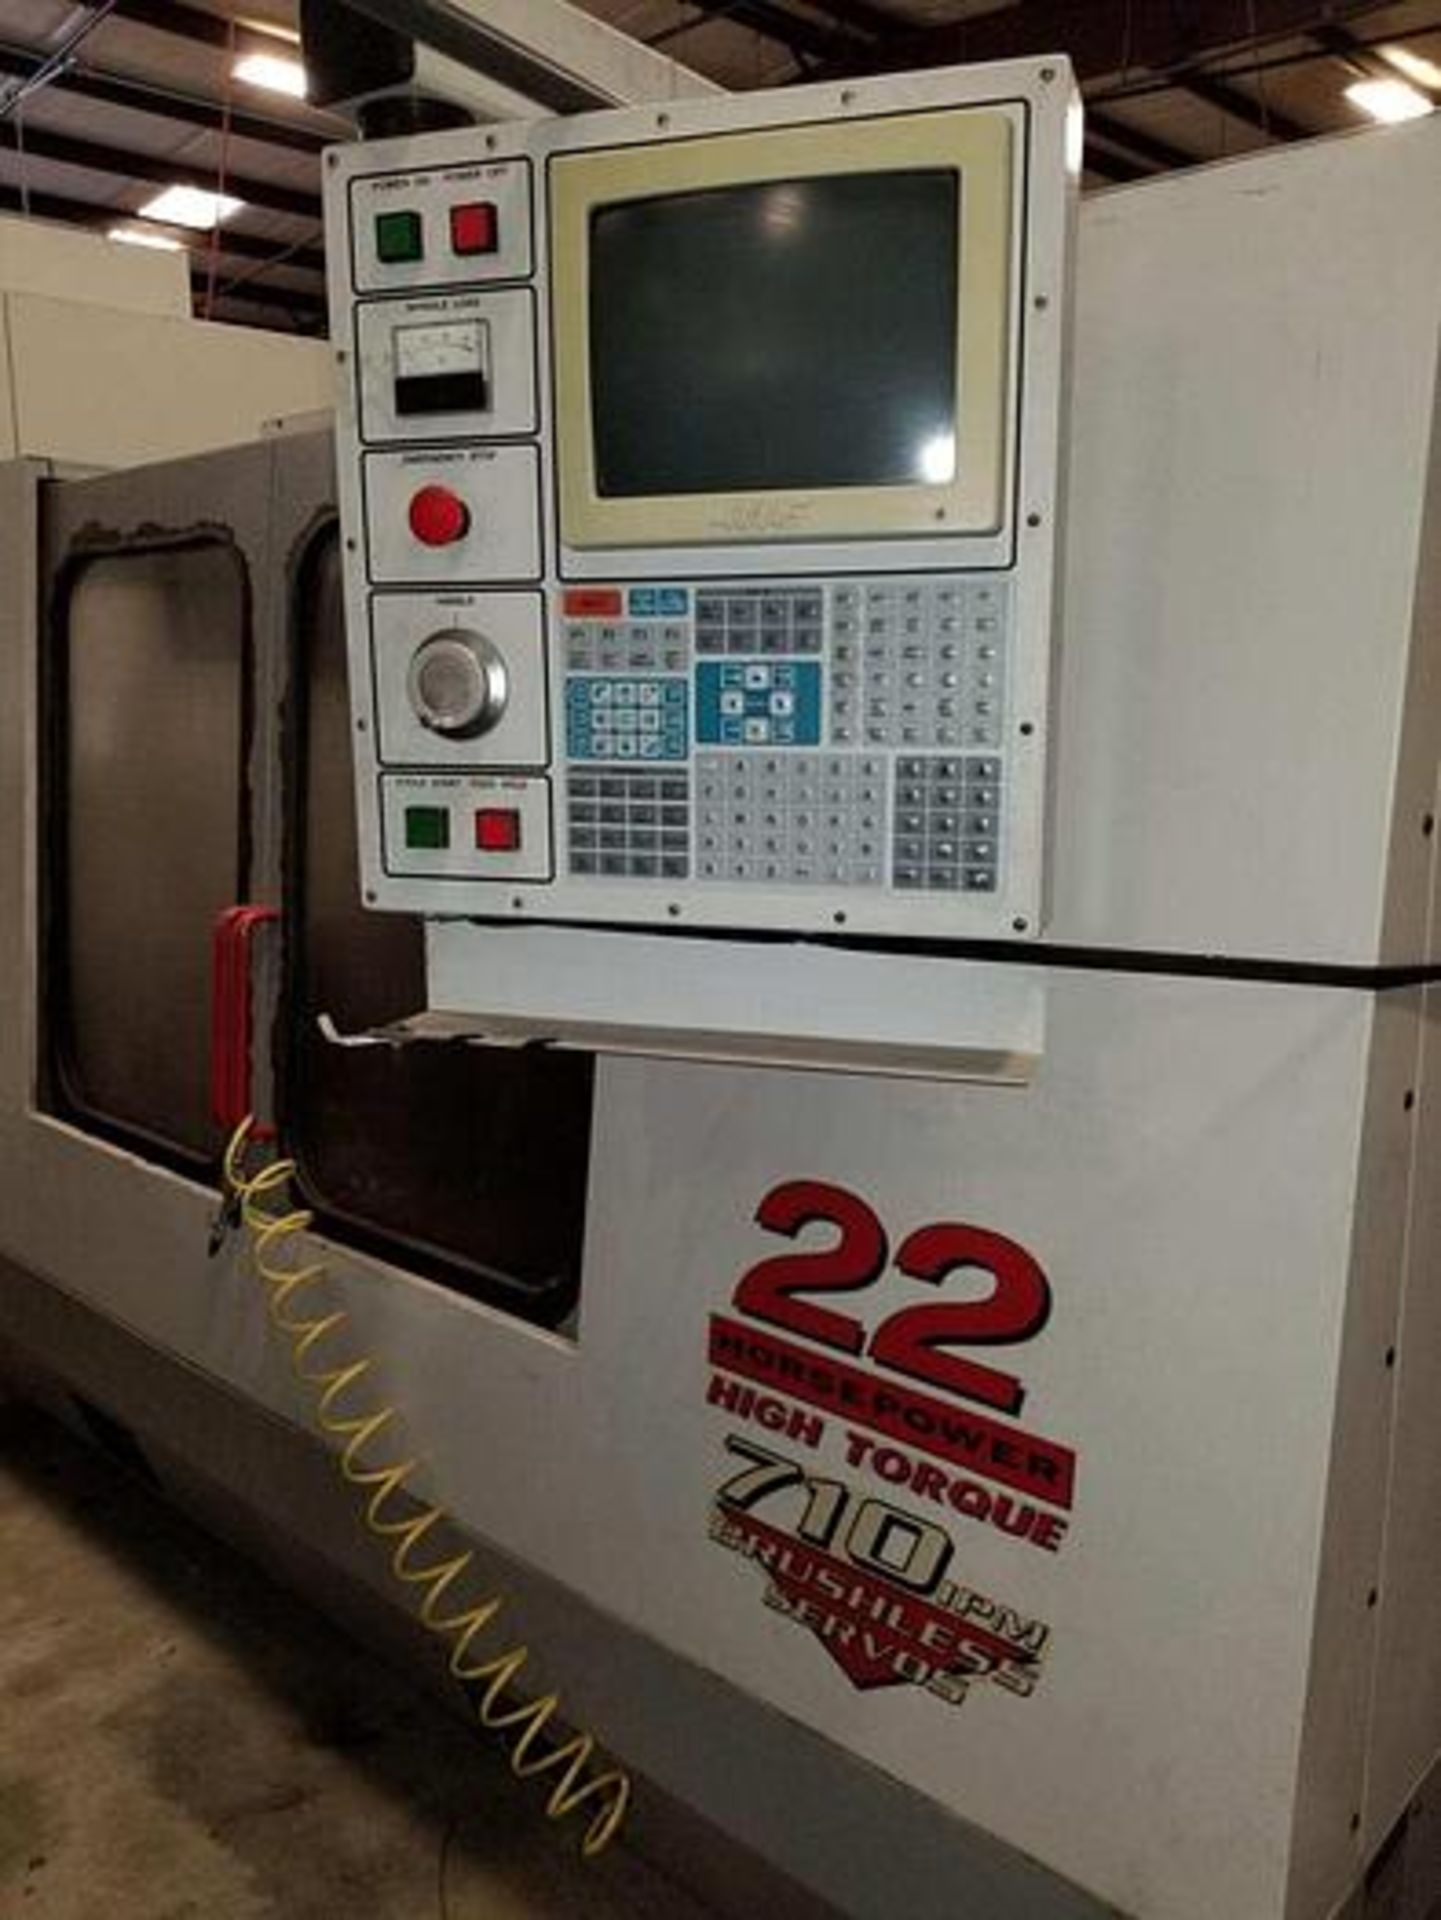 1996 HAAS VF-3 CNC Vertical Machining Center - Image 3 of 11